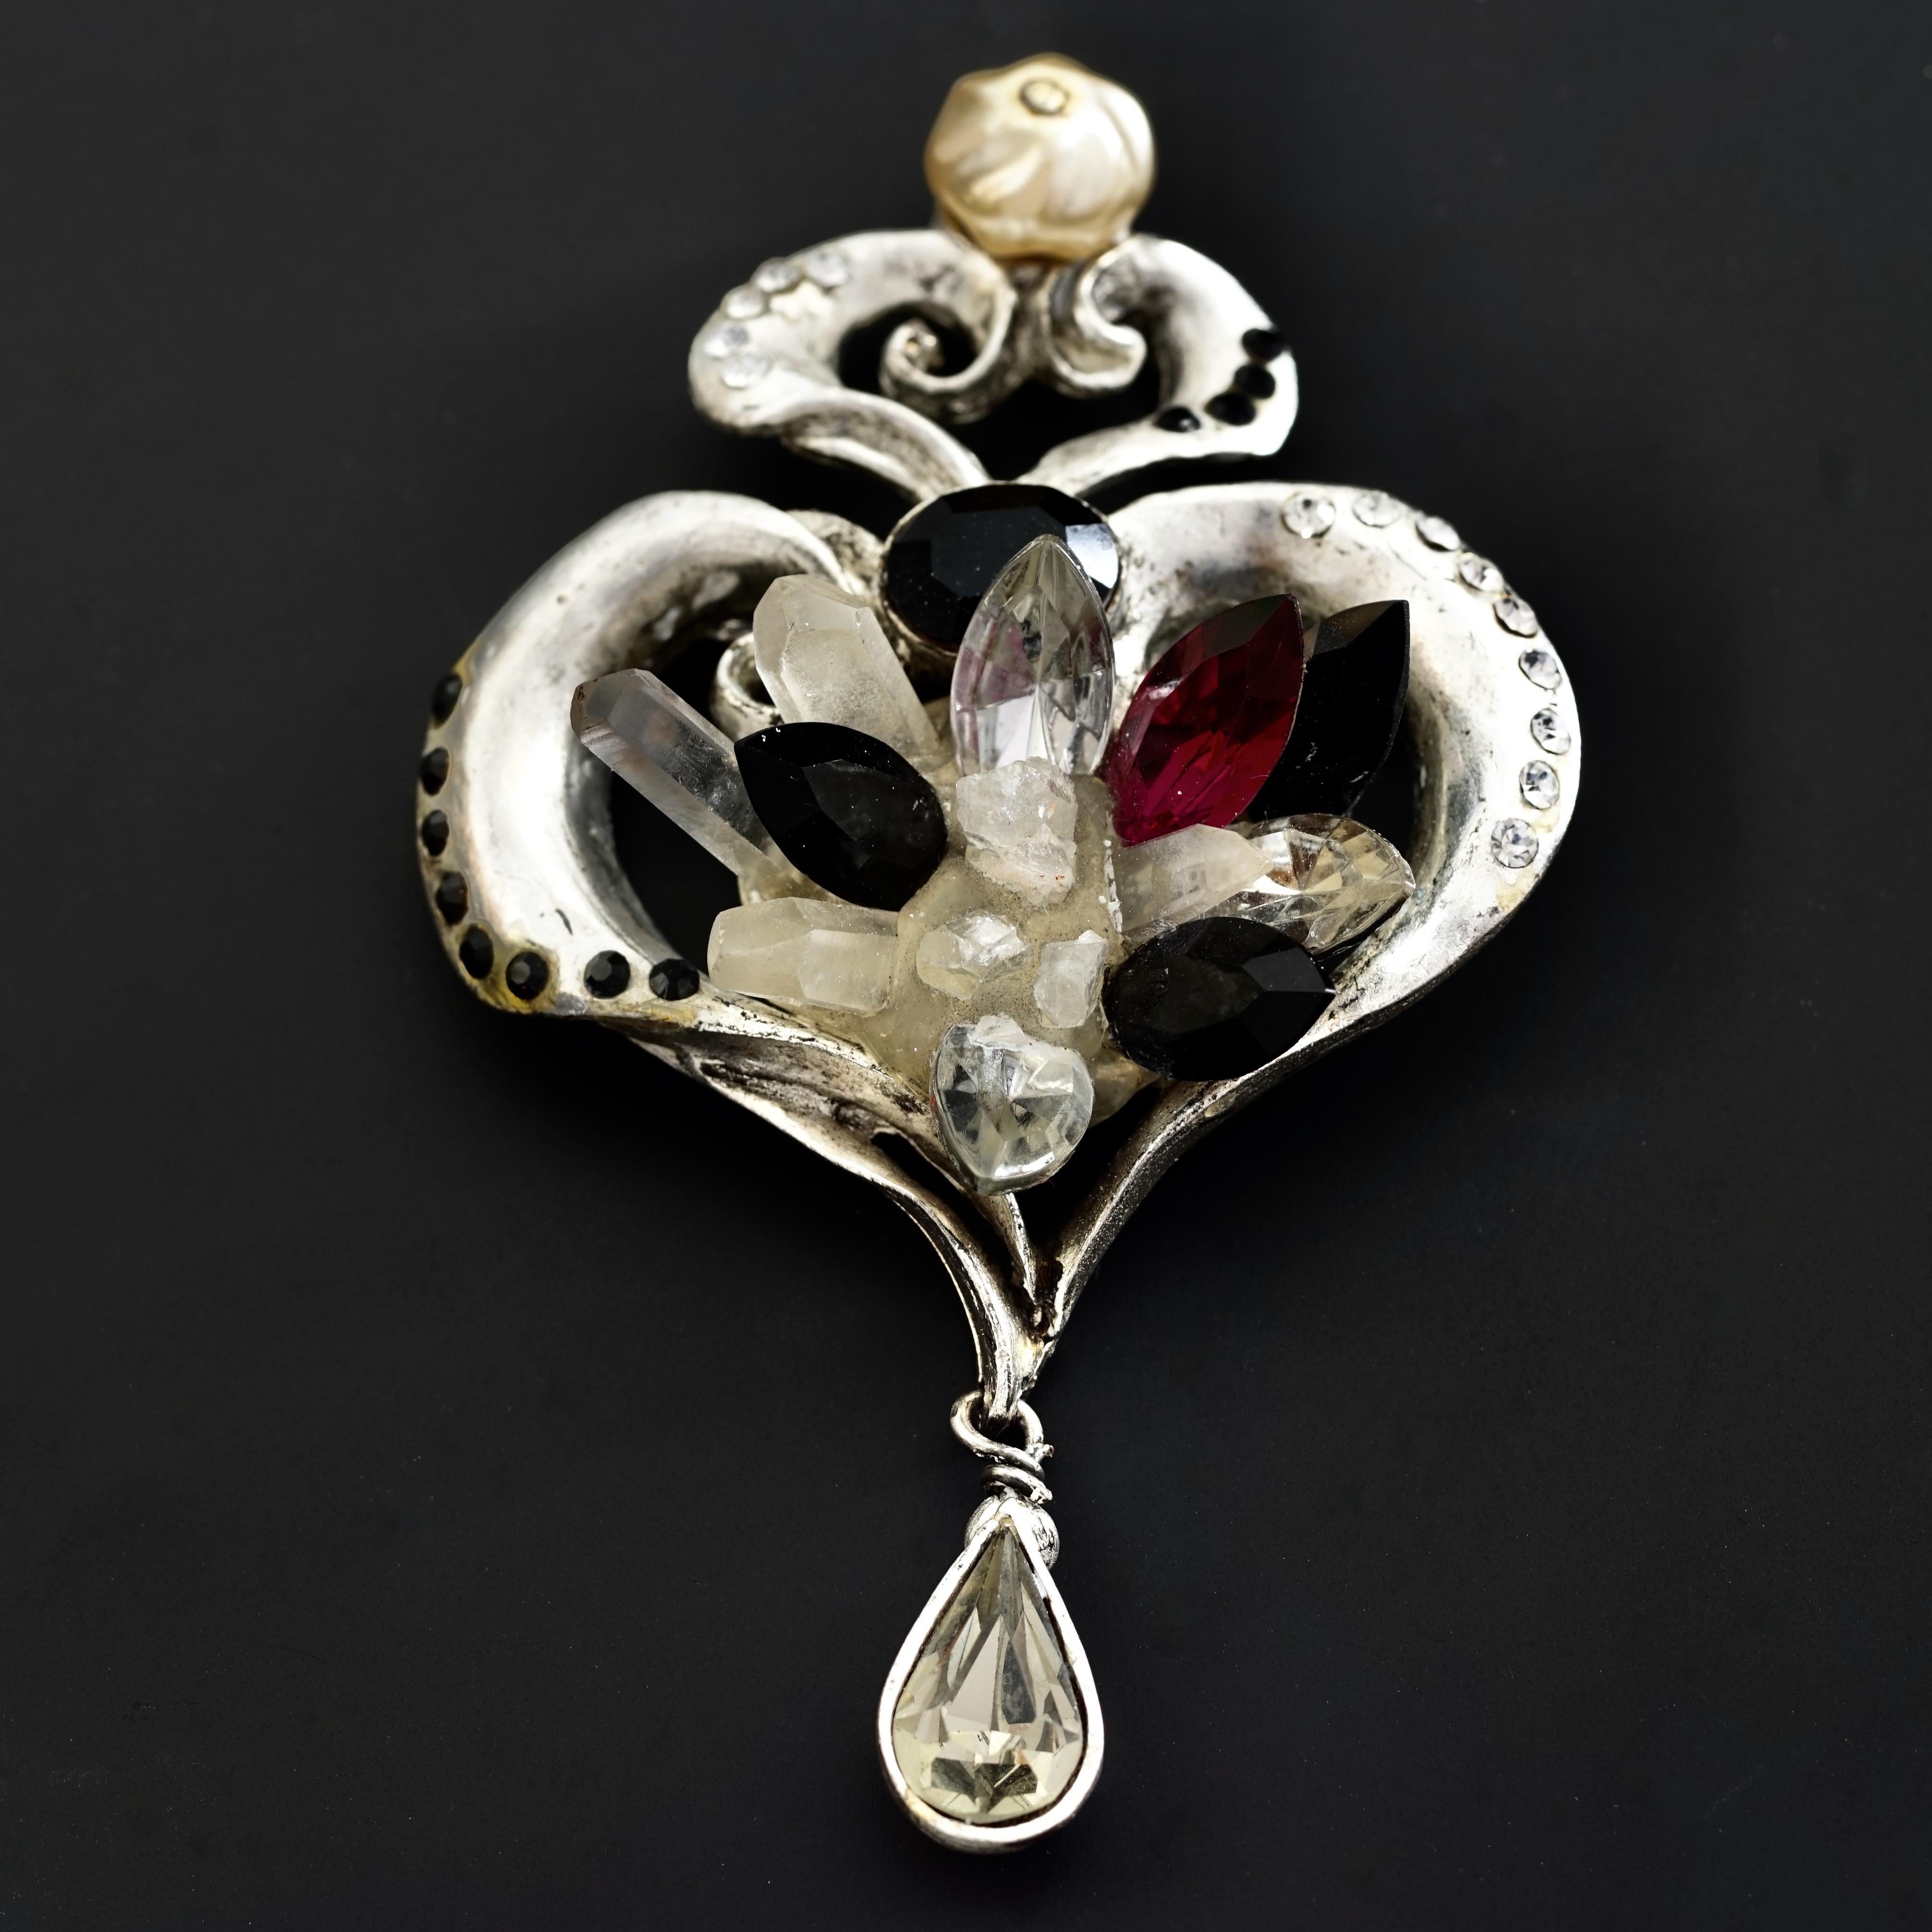 Vintage CHRISTIAN LACROIX Heart Jewelled Crystal Quartz Brooch In Good Condition For Sale In Kingersheim, Alsace